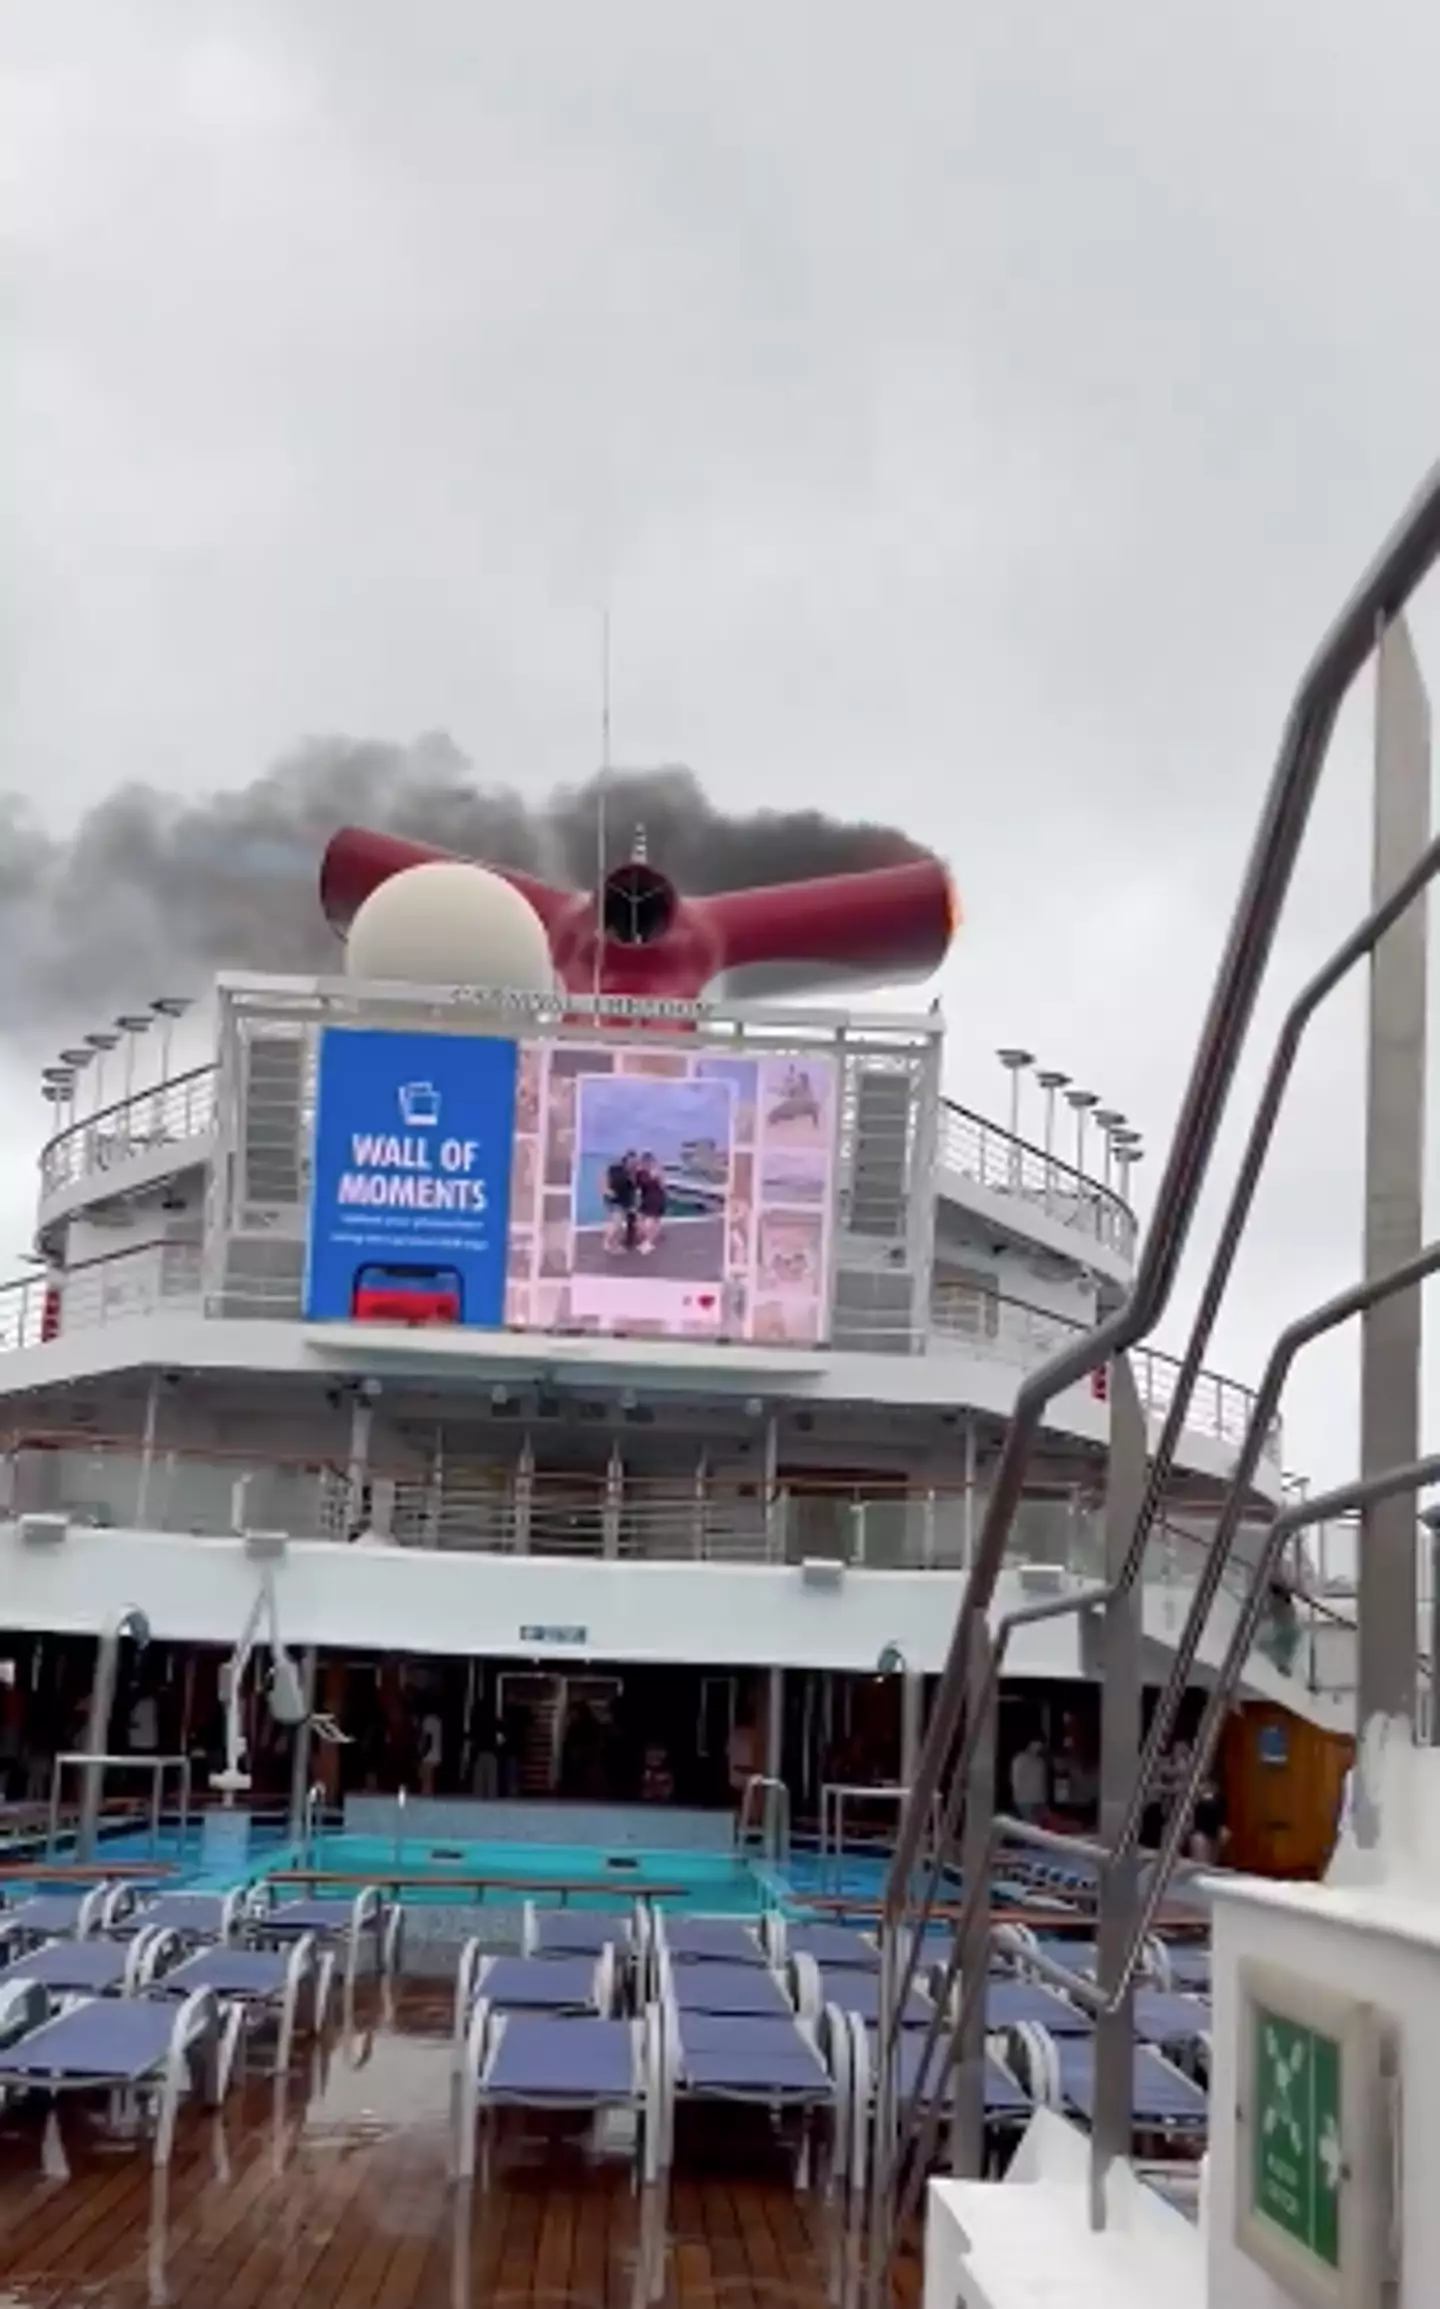 The ship's funnel caught fire.